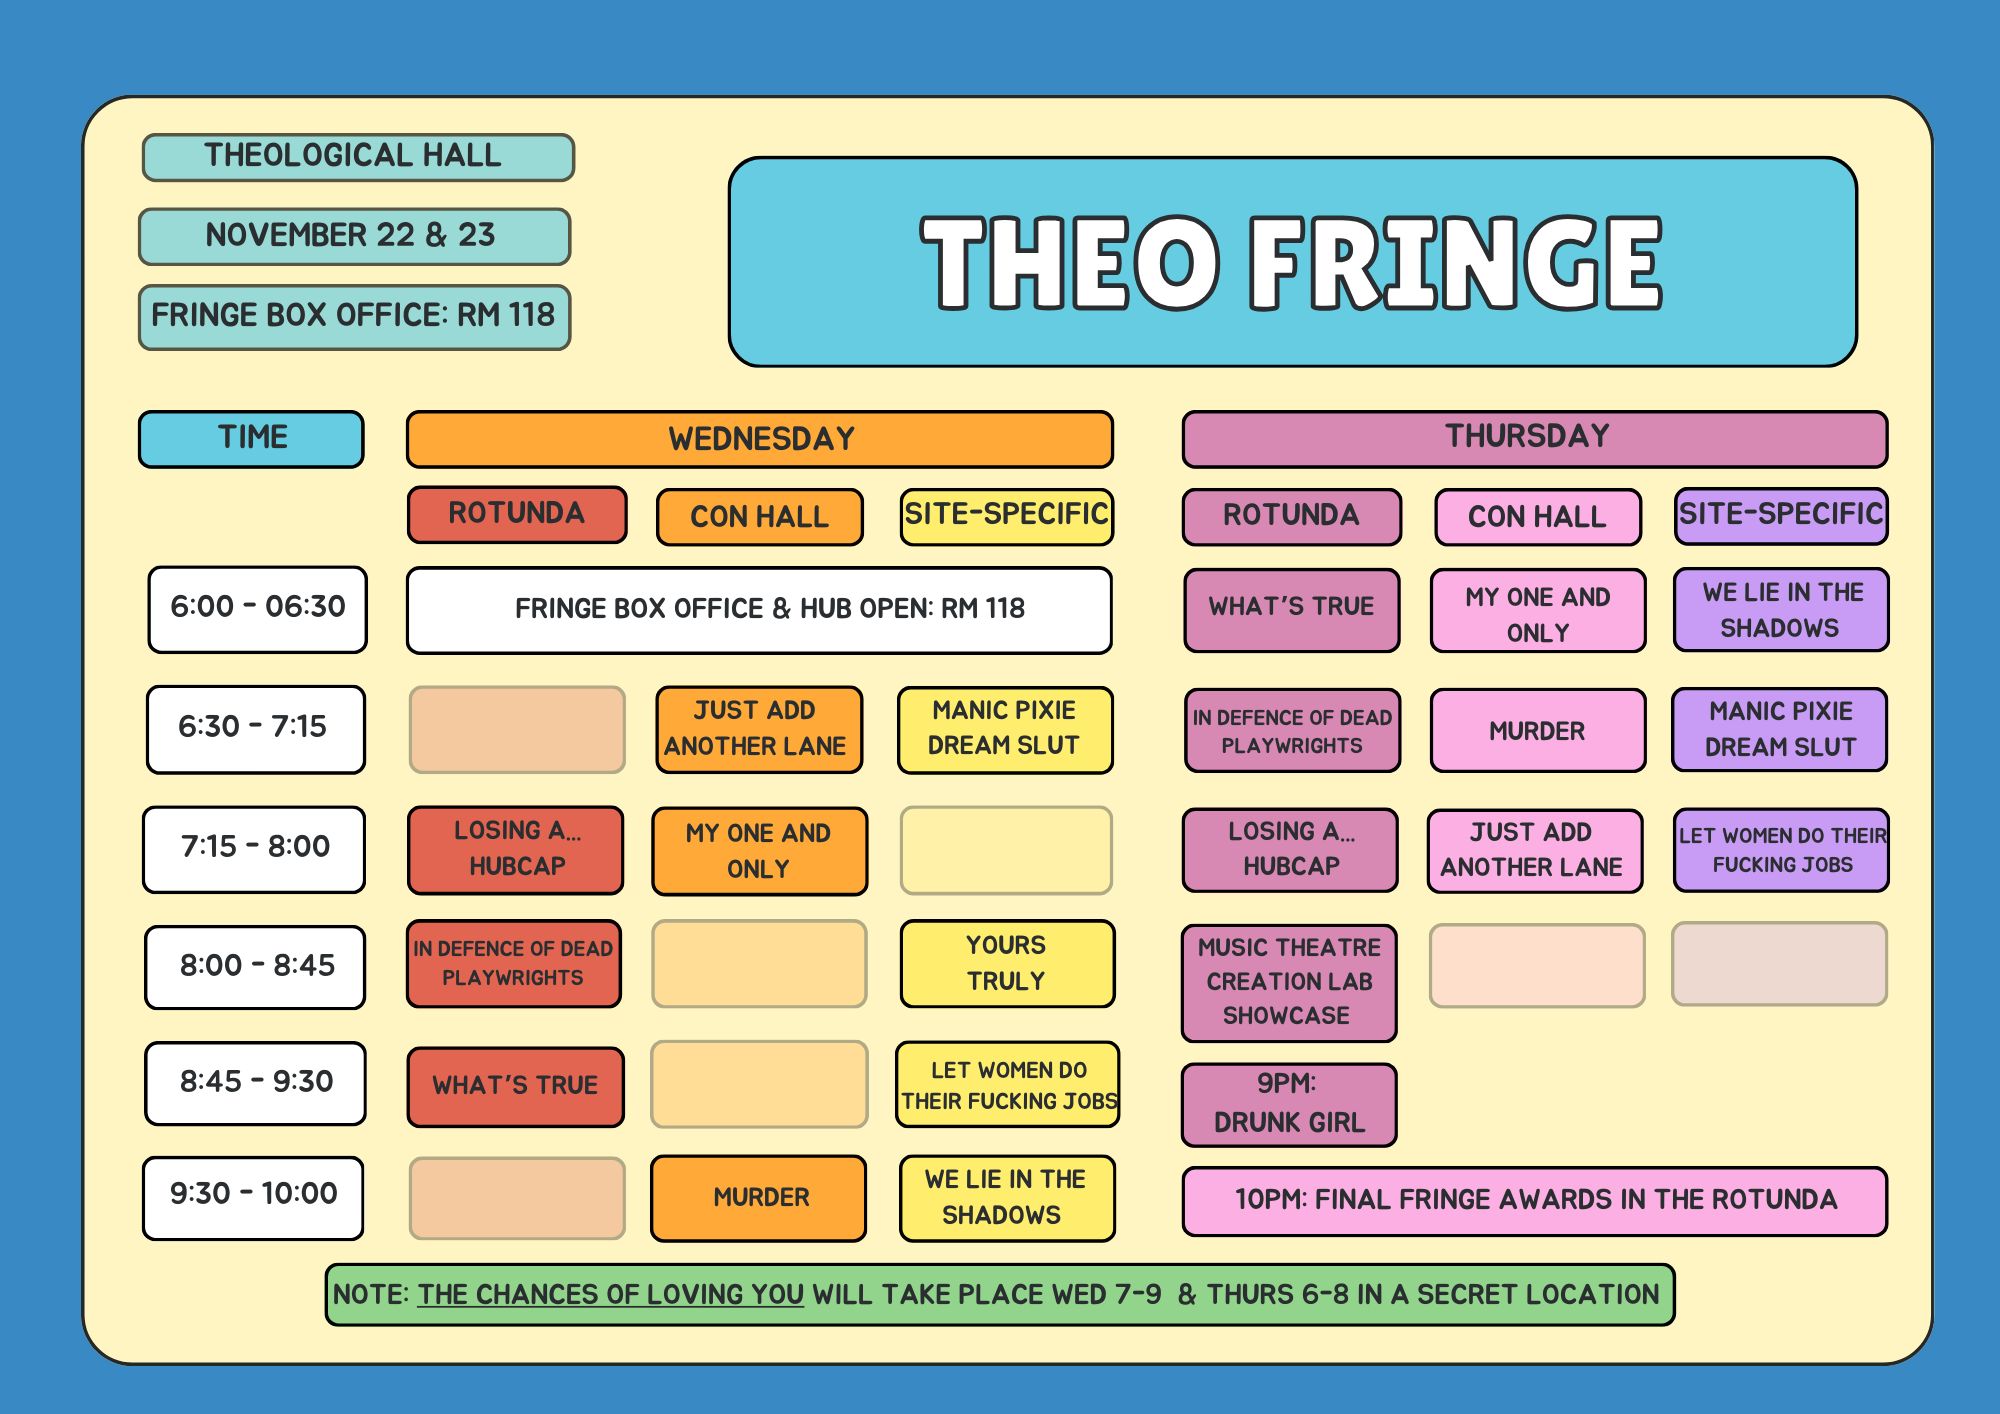 Schedule for TK THEO Fringe 2023. Location, days, times, and shows involved are noted.